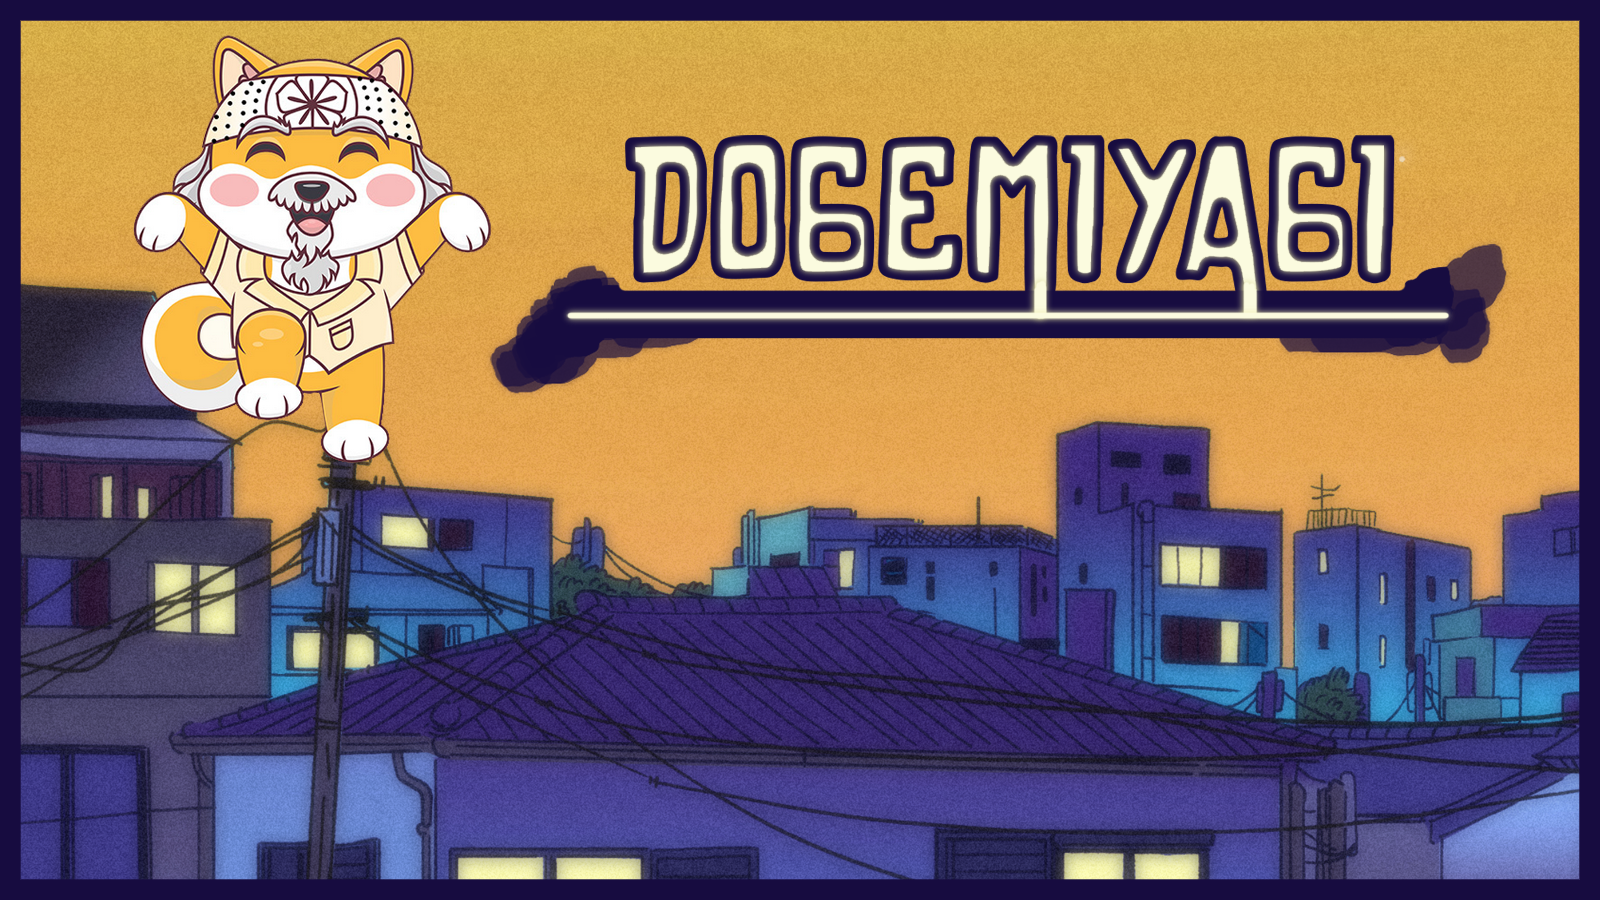 Decentralization is Fueling Community Growth in DogeMiyagi, Polygon, and Cosmos — Is This the Crypto Revolution?